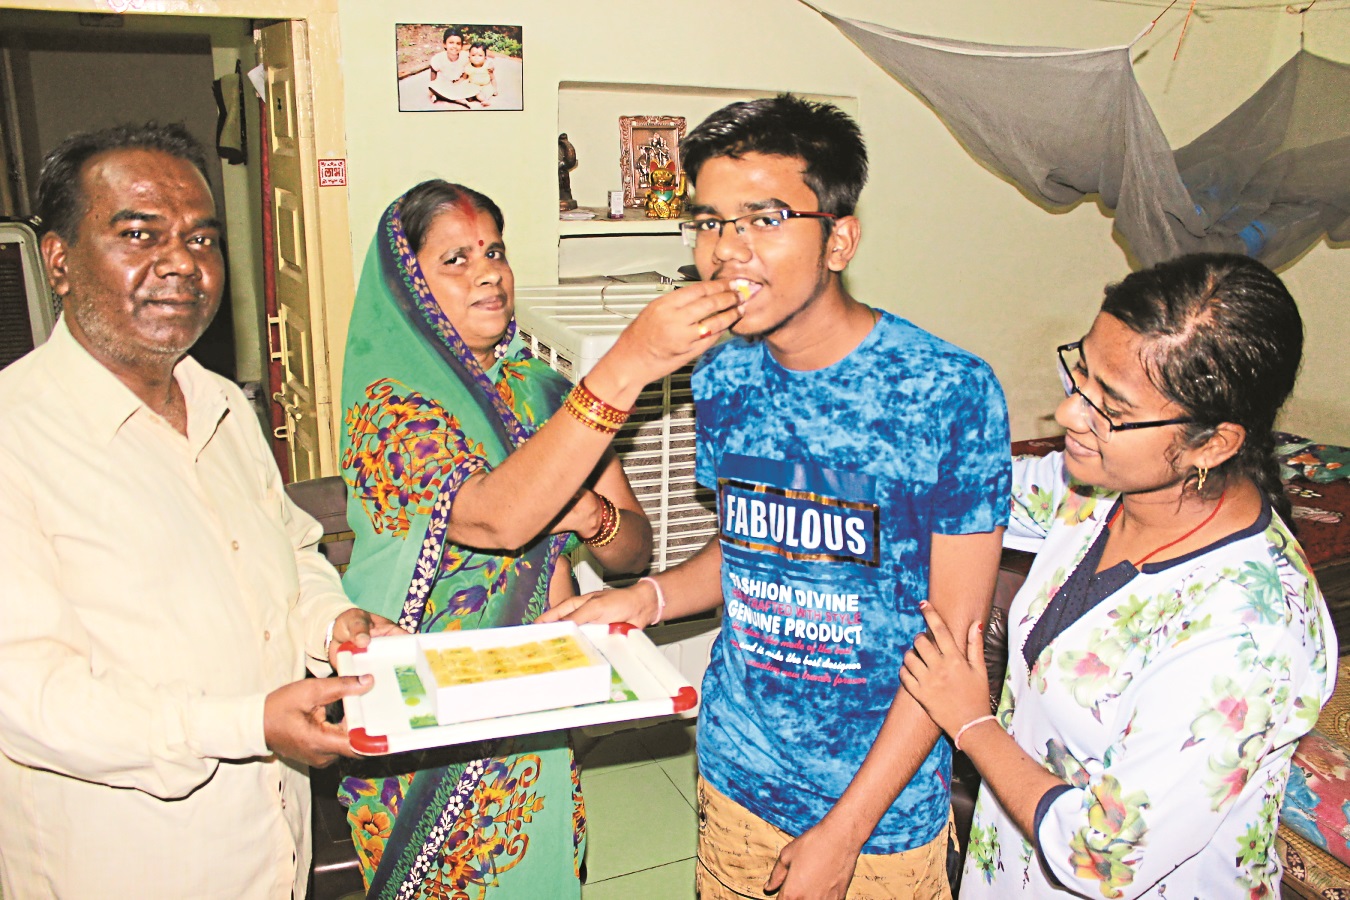 Parents are excited to bring good marks in exams